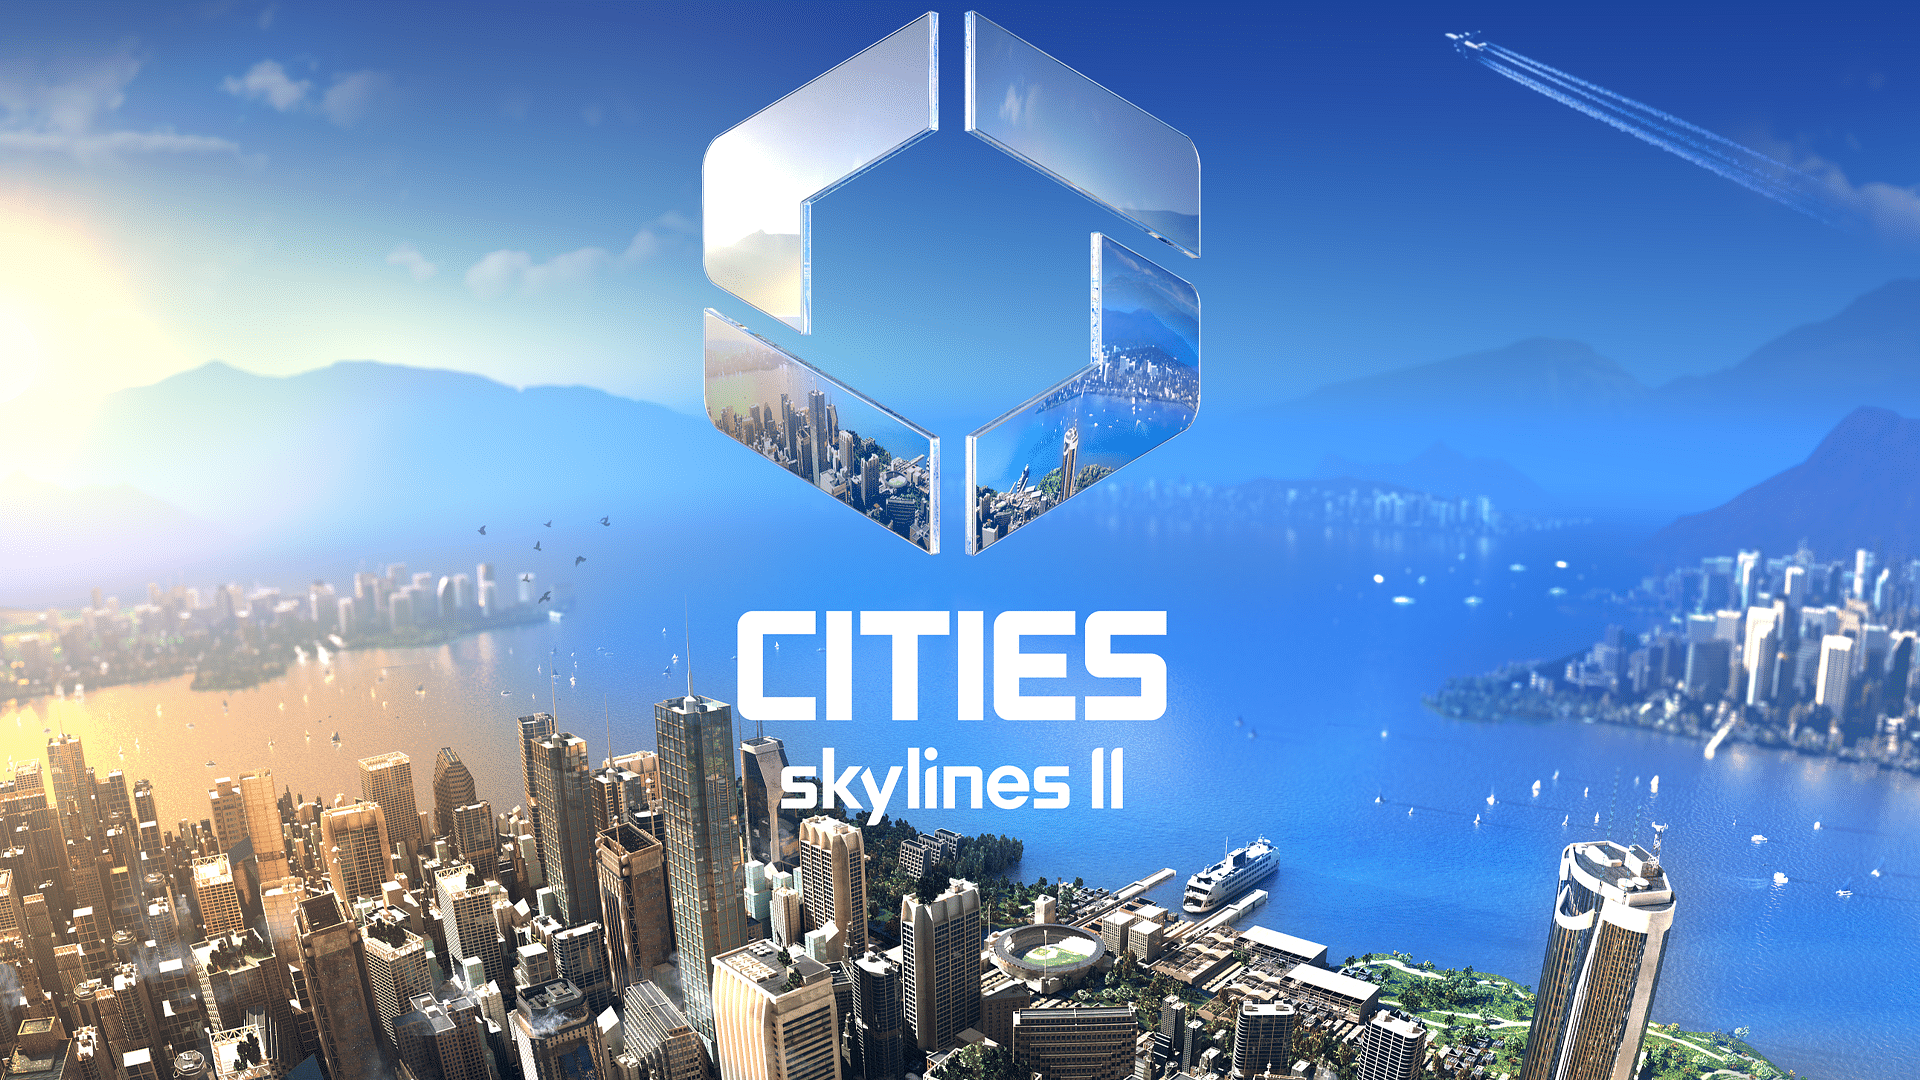 CITIES SKYLINES:2 GAMEPLAY - Building an Airport - Live from